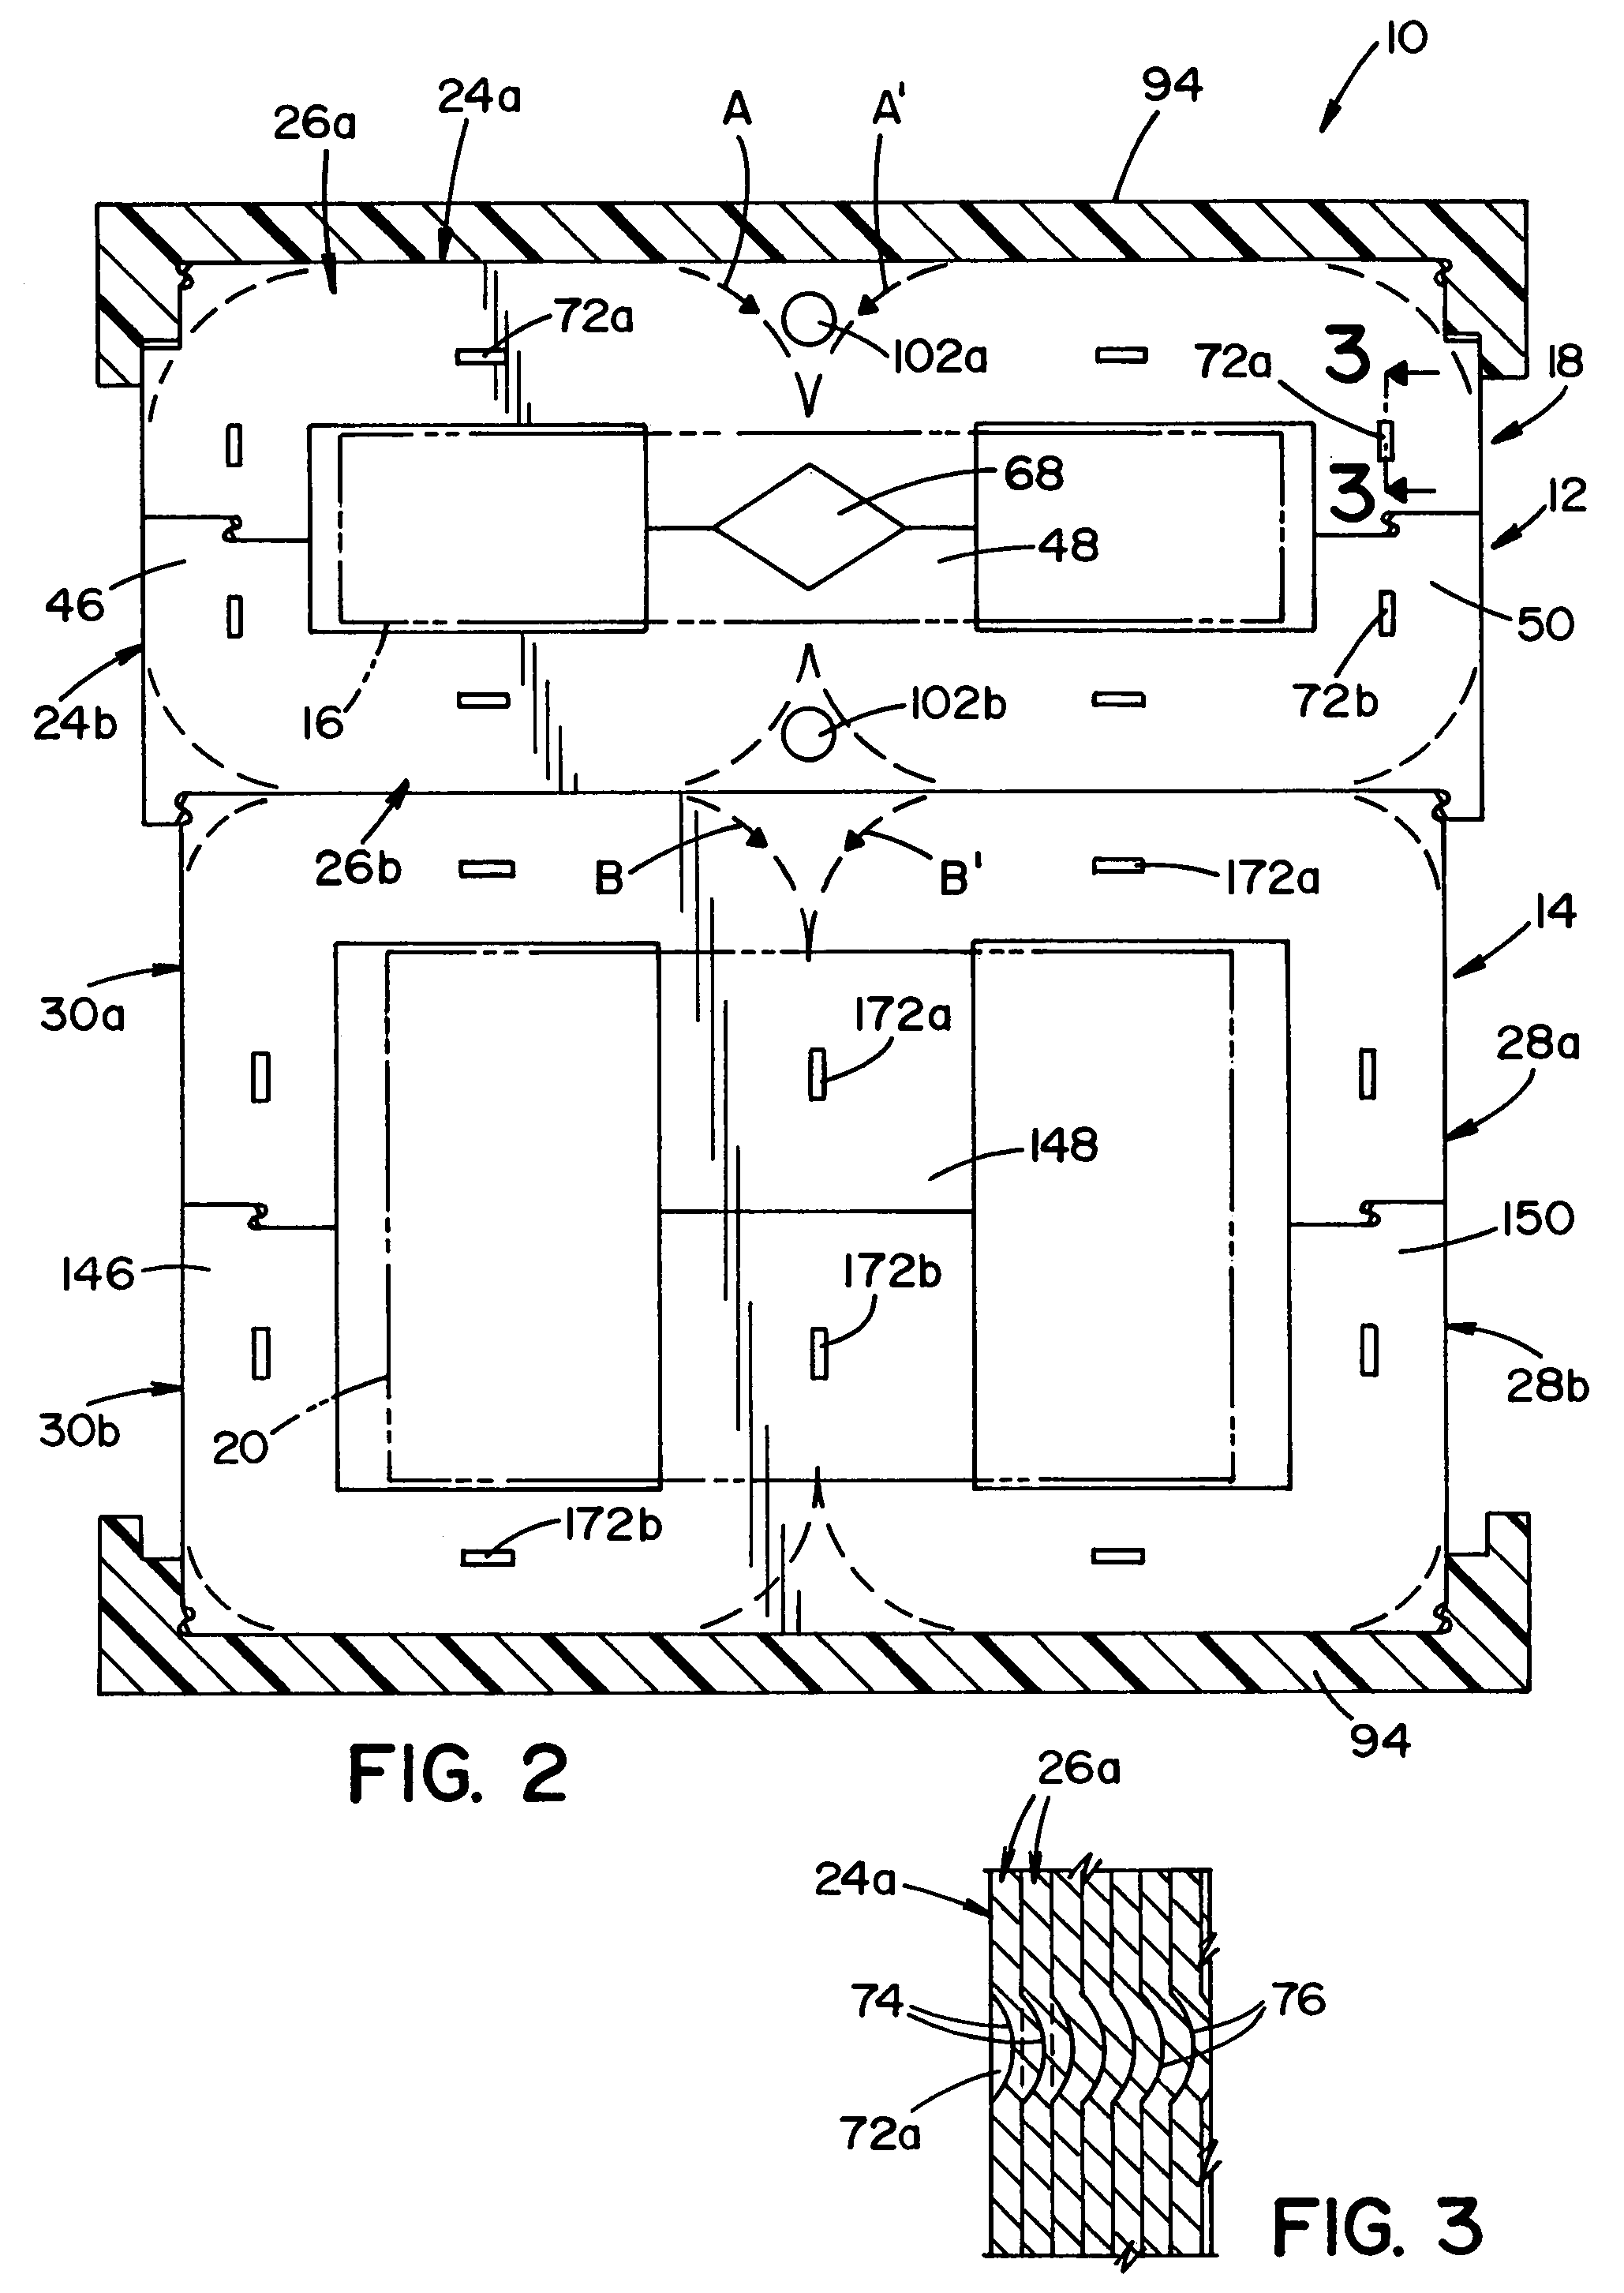 Snap-together choke and transformer assembly for an electric arc welder